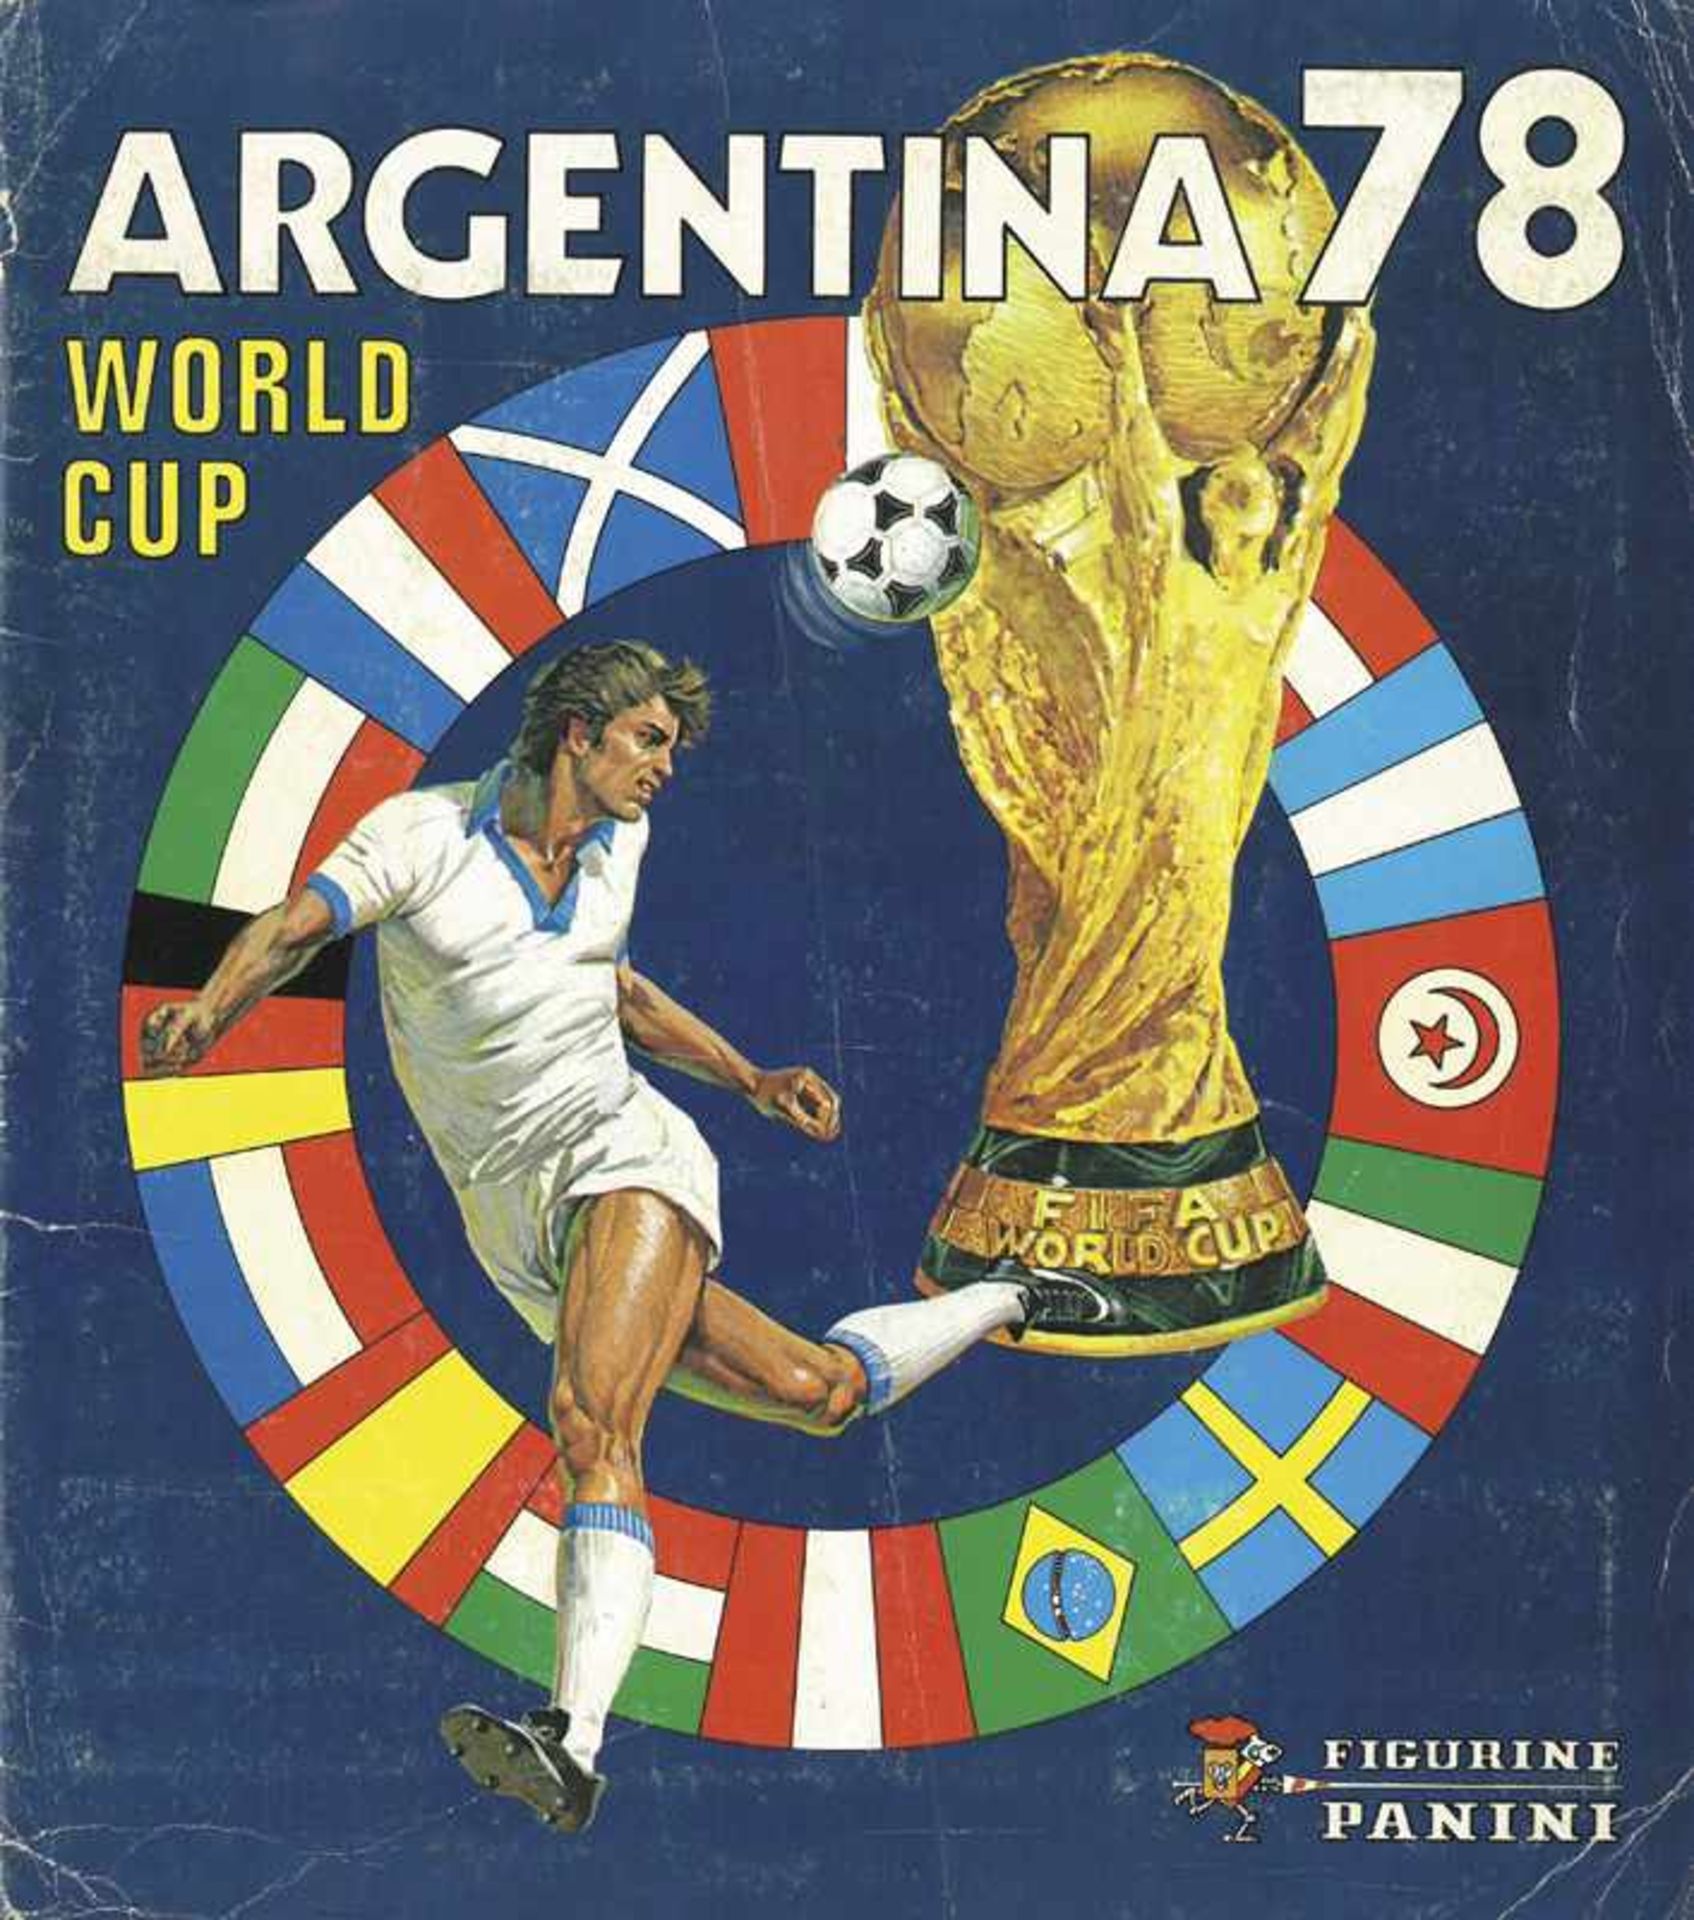 World Cup 1978 Panini Sticker Album Complete - World Cup 1978 in Argentina. Complete with 400